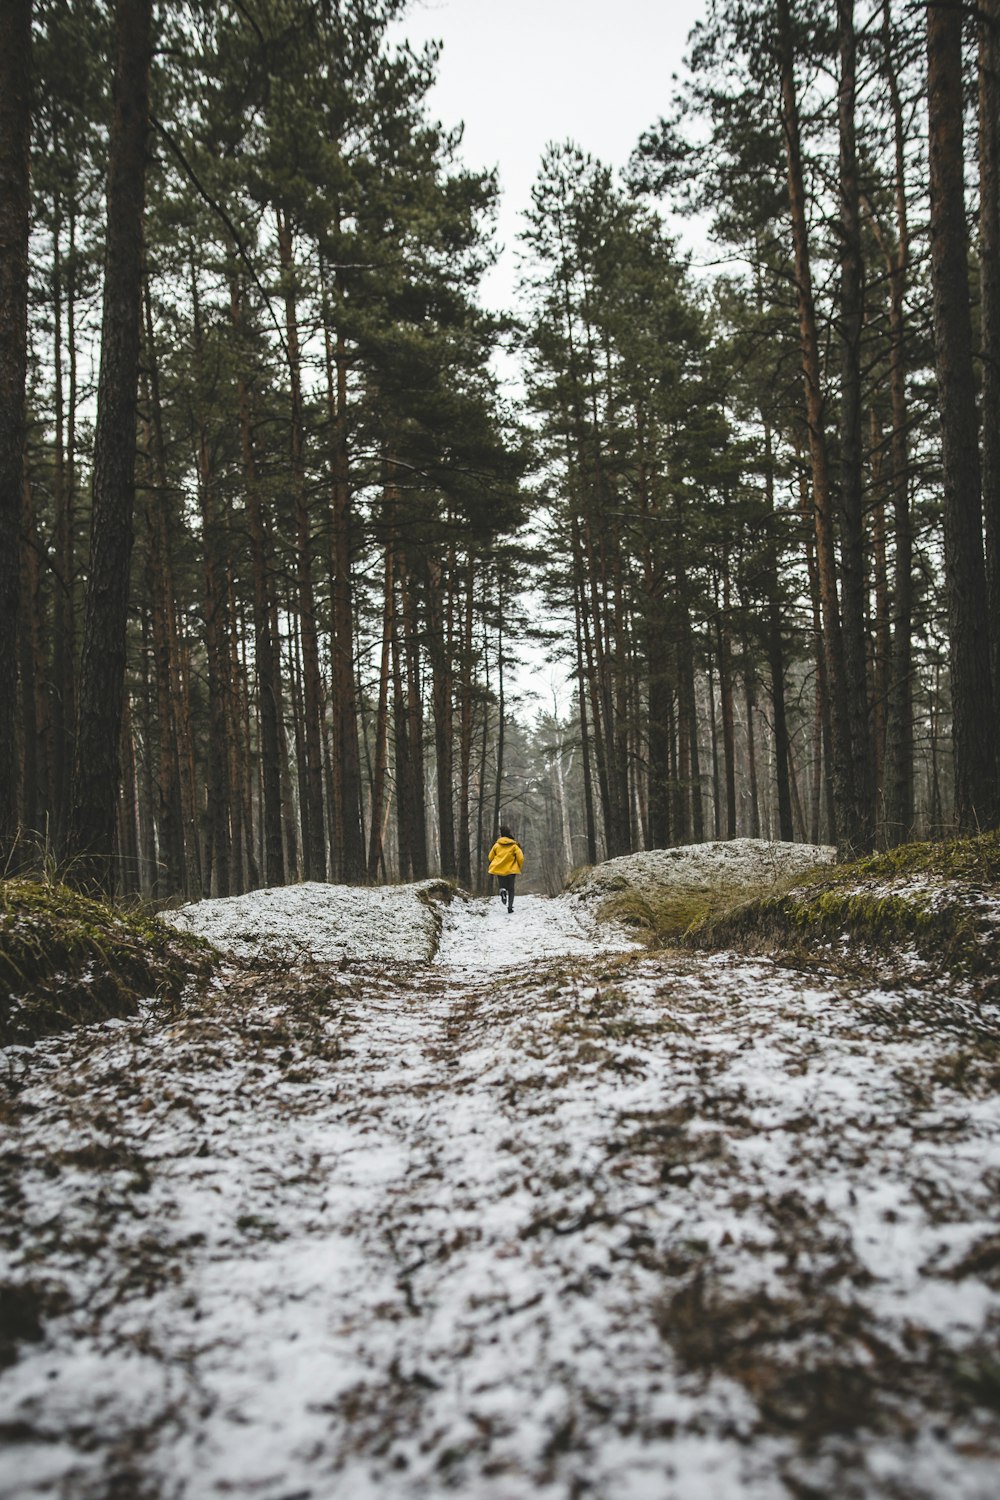 person in yellow jacket running on forest